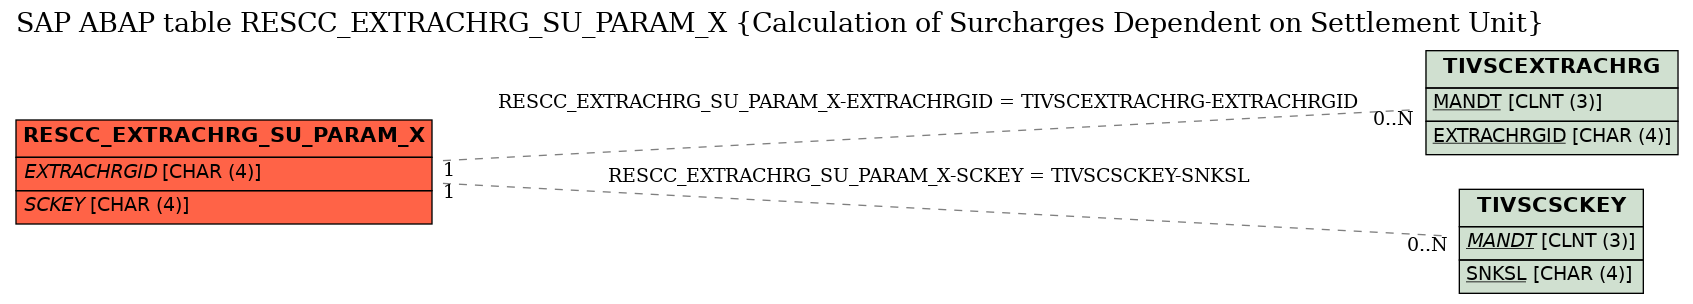 E-R Diagram for table RESCC_EXTRACHRG_SU_PARAM_X (Calculation of Surcharges Dependent on Settlement Unit)